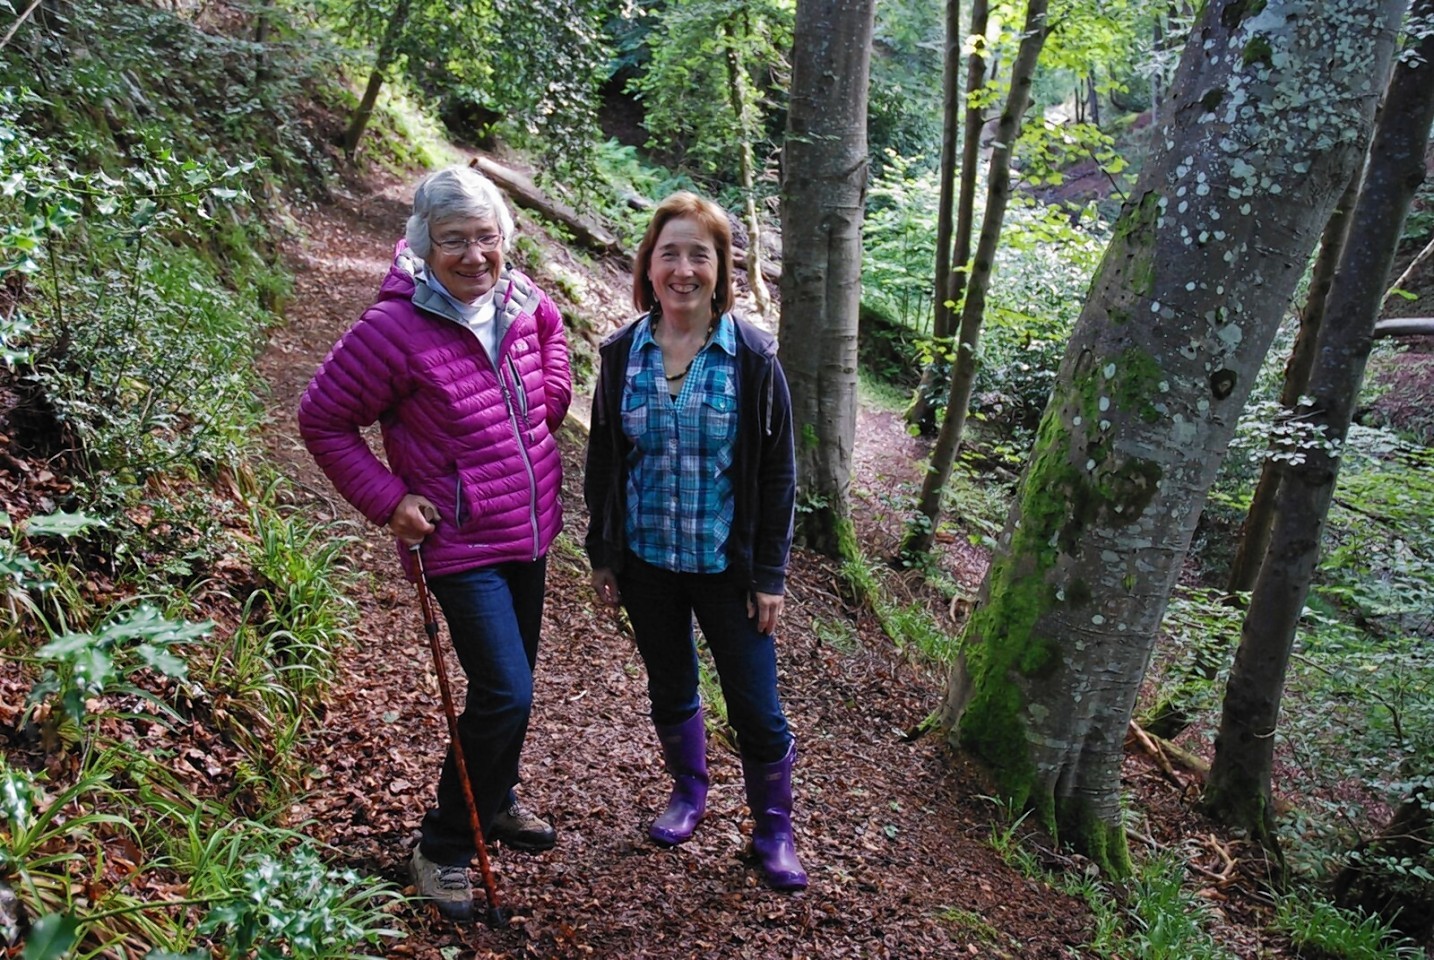 Aithne Barron, owner of the woodland, and Gina O’Brien, chairman of the trustees eager to bring the woodland into community ownership.